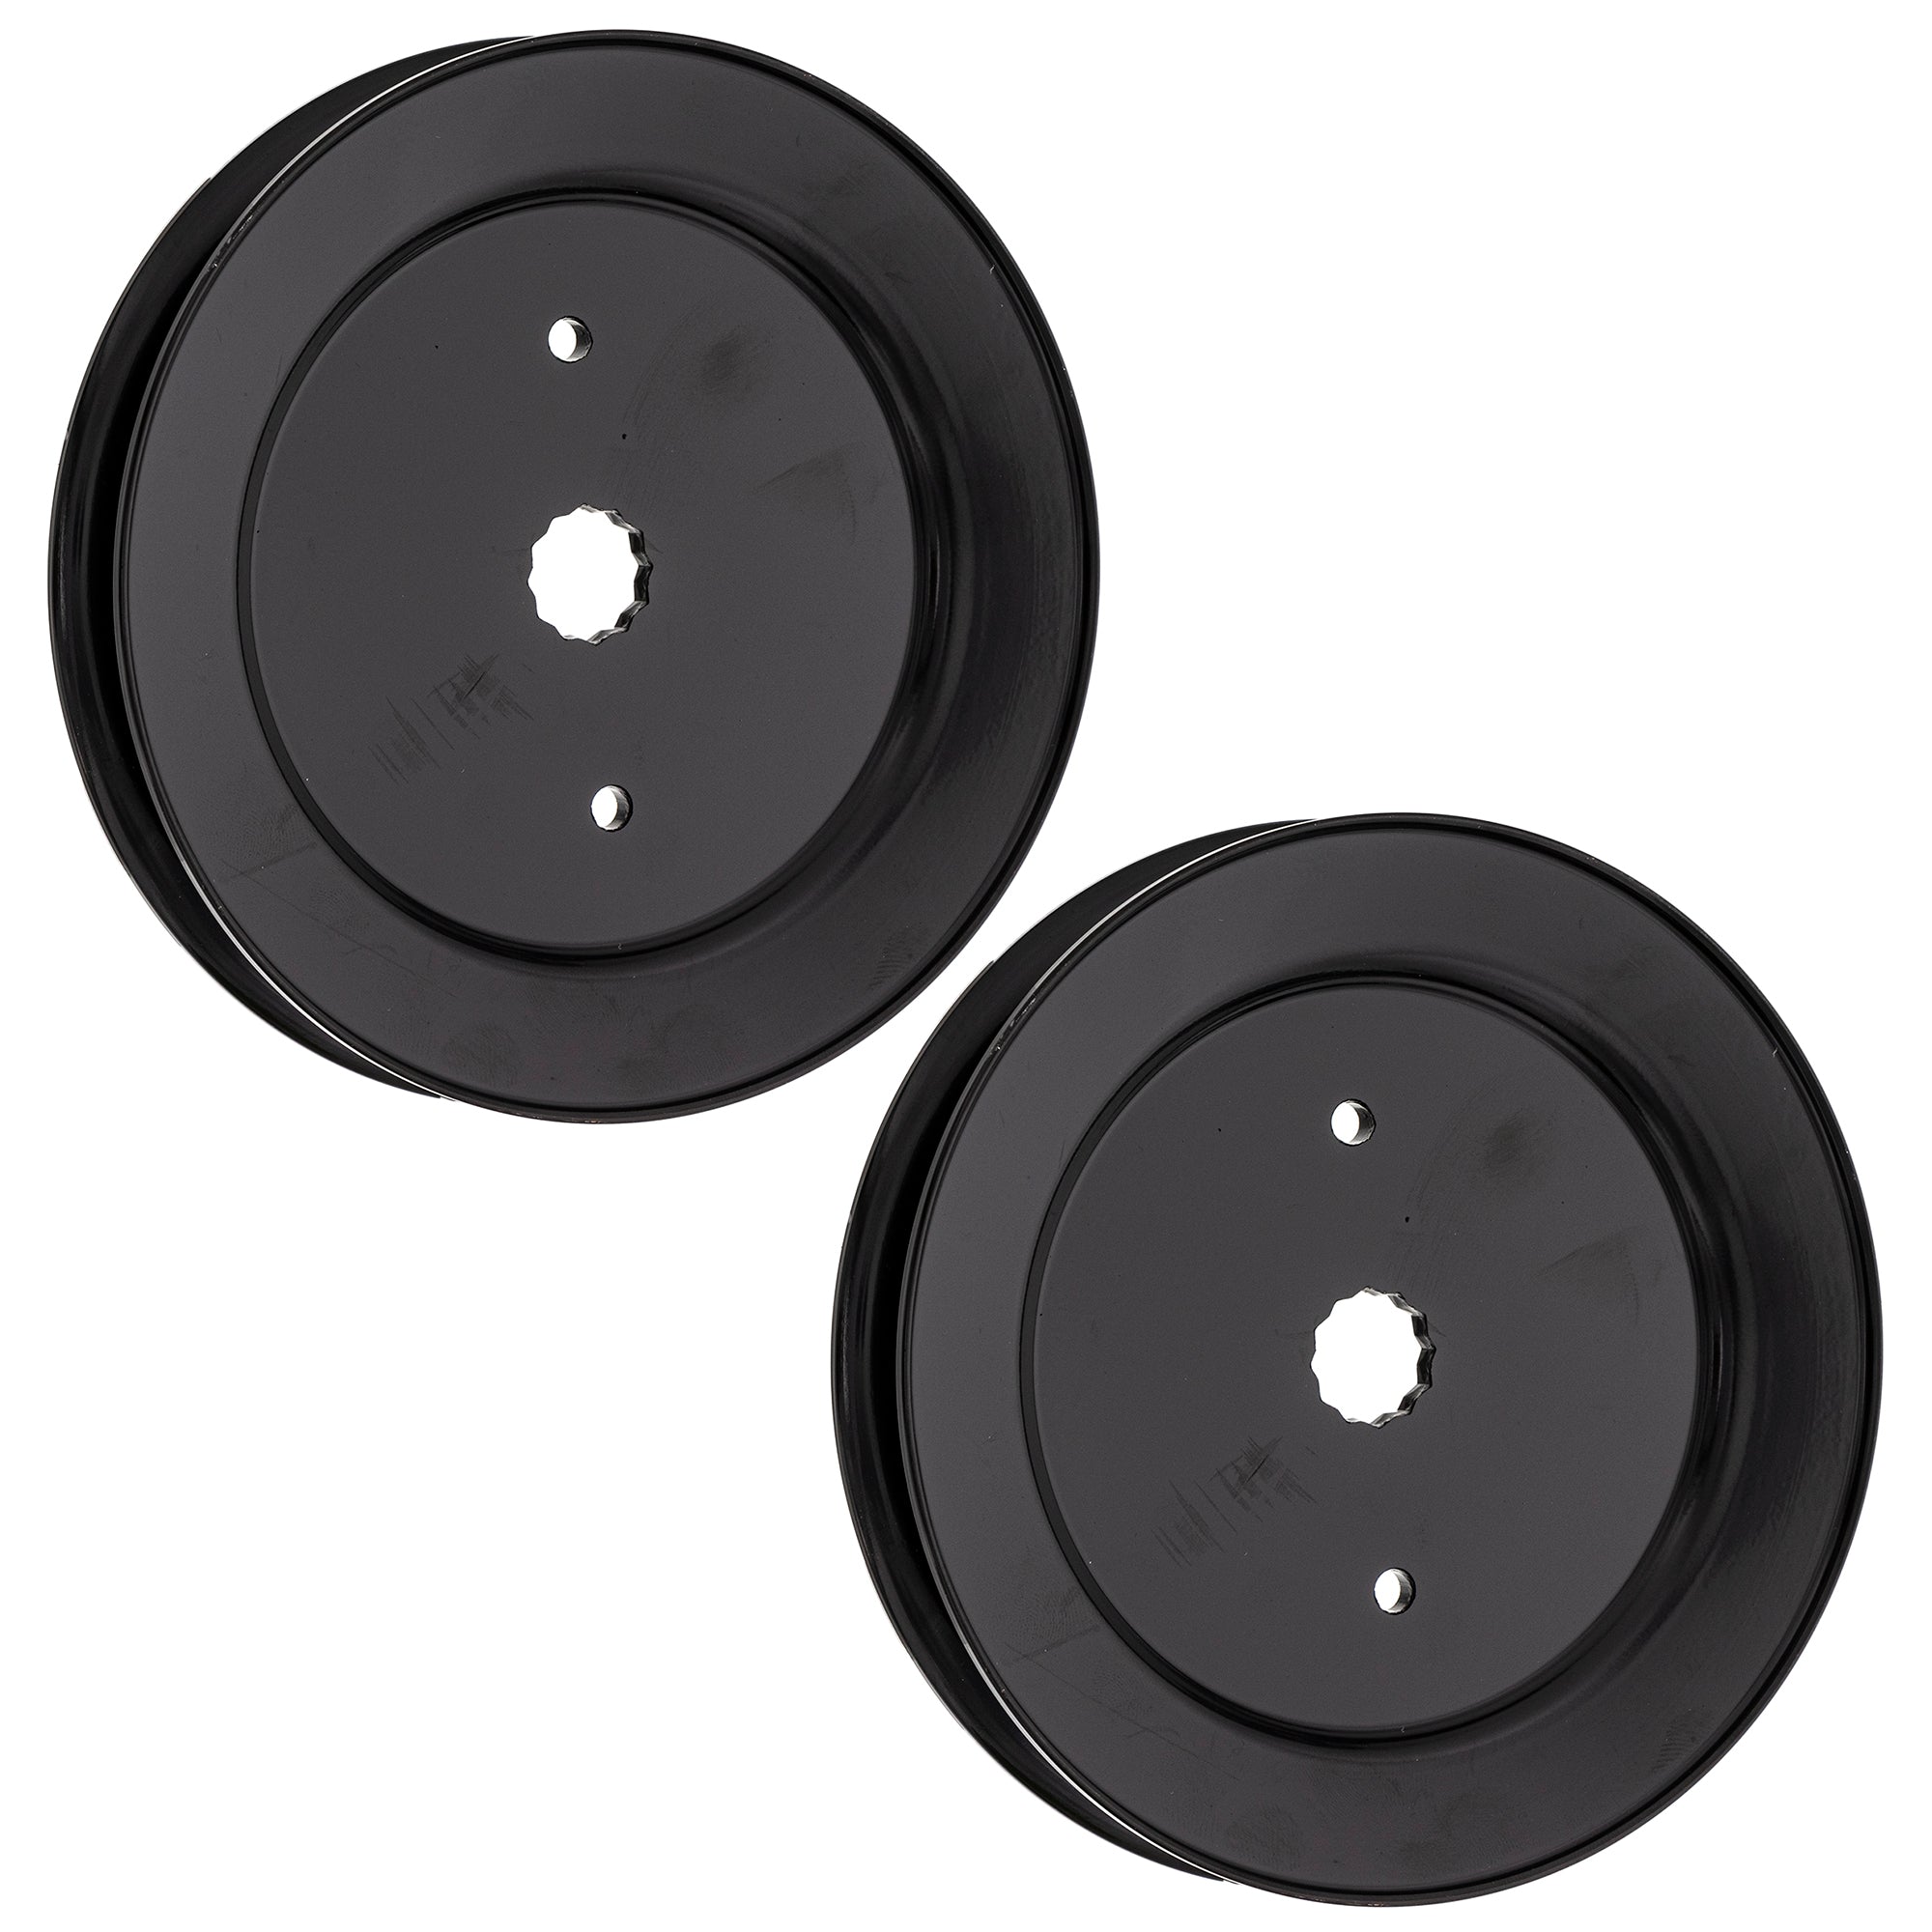 8TEN MK1000363 Deck Spindle & Pulley Kit for Stens Oregon MTD Cub